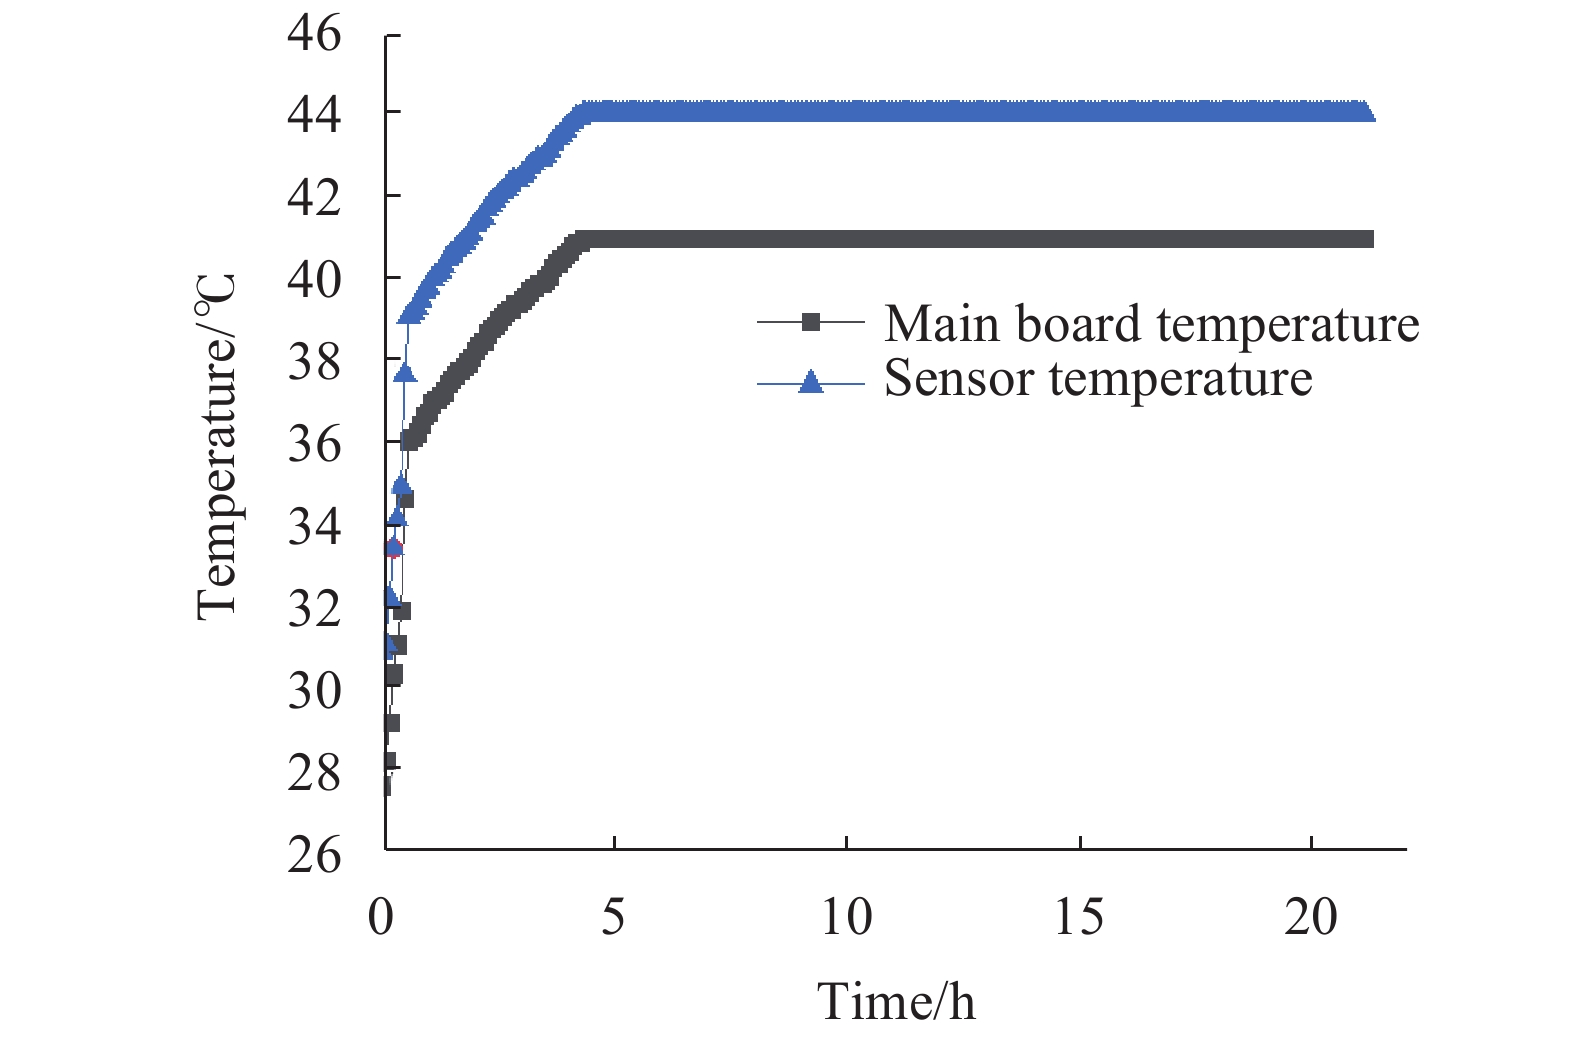 Temperature change of the imaging device and the main board after turning on